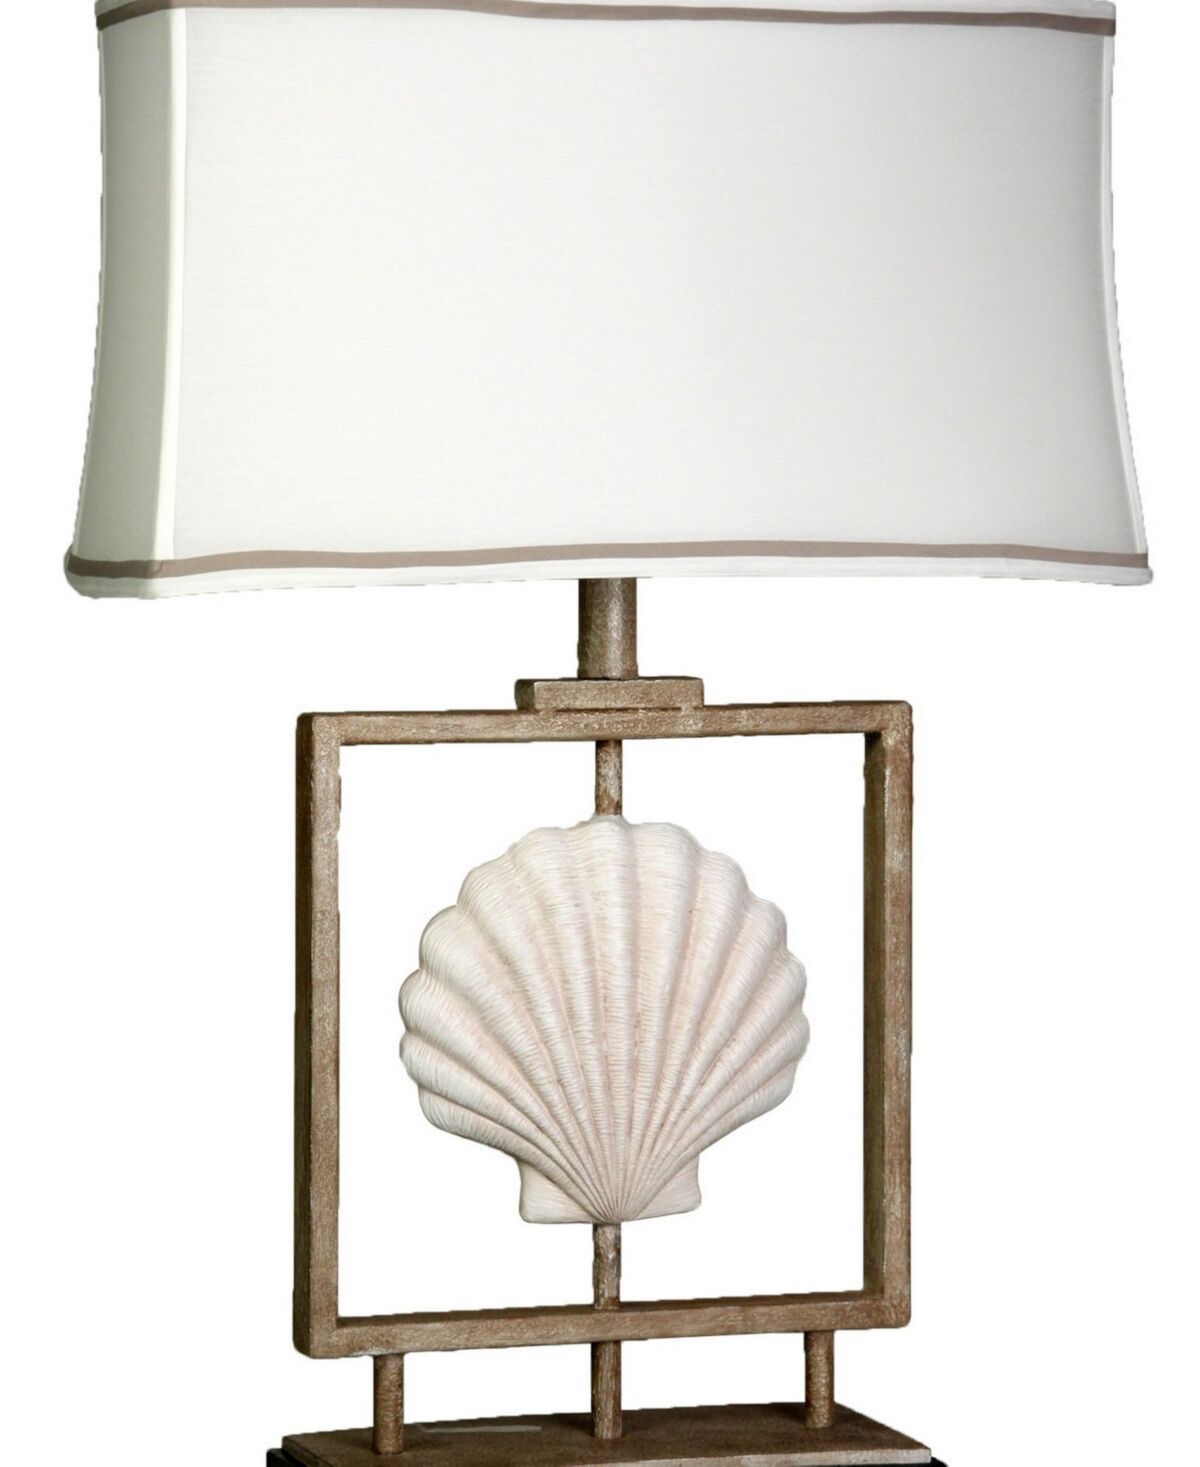 Stylecraft Home Collection StyleCraft Fabric Shade Table Lamp - Sand